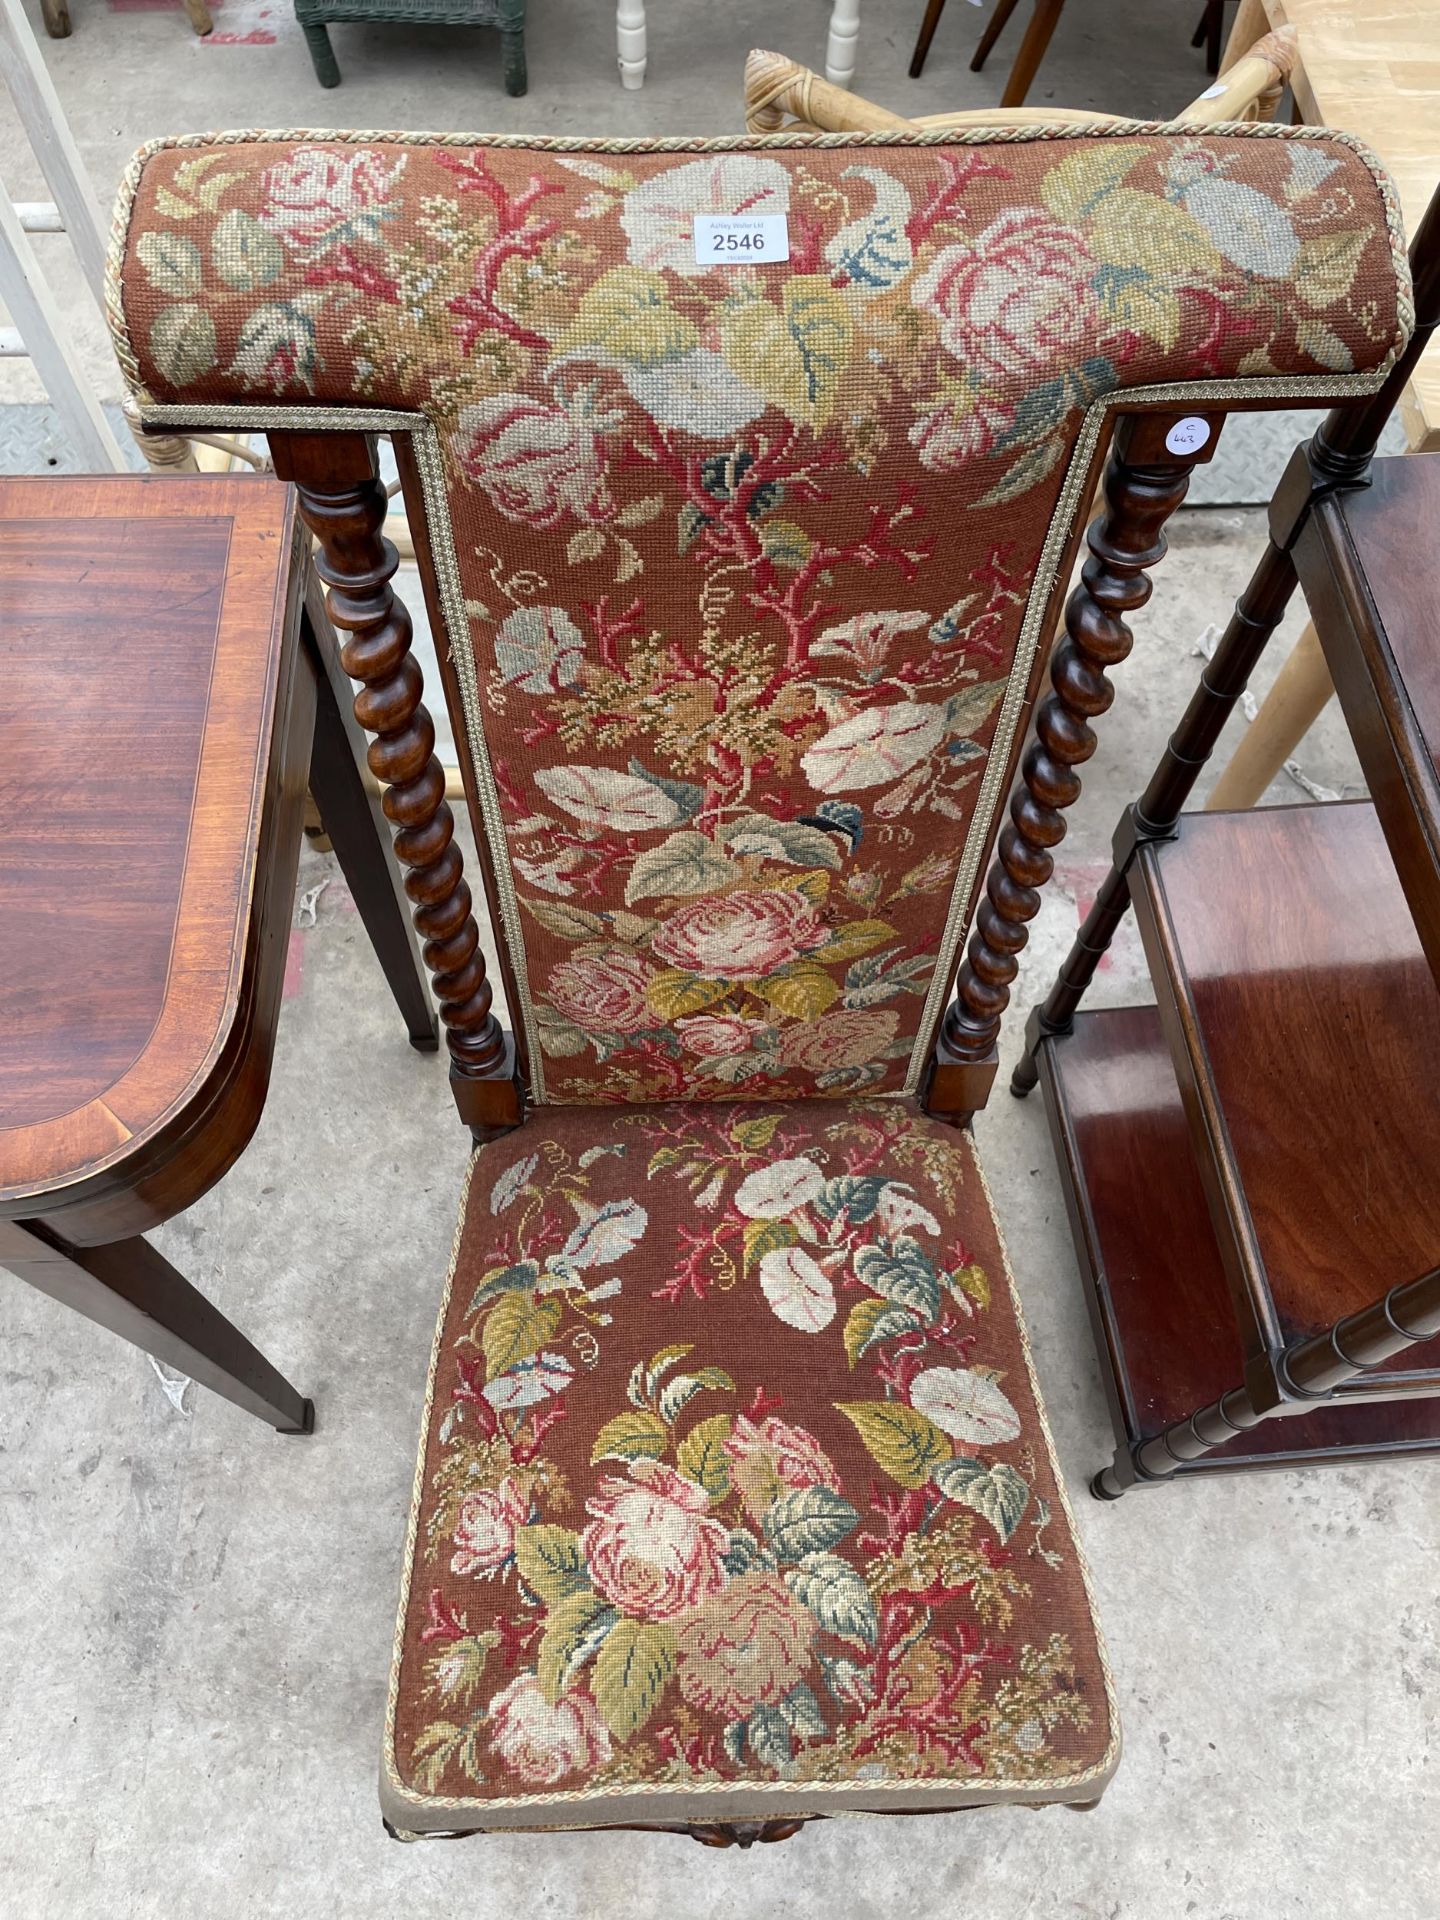 A VICTORIAN MAHOGANY PRIE DEU CHAIR WITH BARLEY TWIST UPRIGHTS AND WOOLWORK SEAT AND BACKS - Image 5 of 5